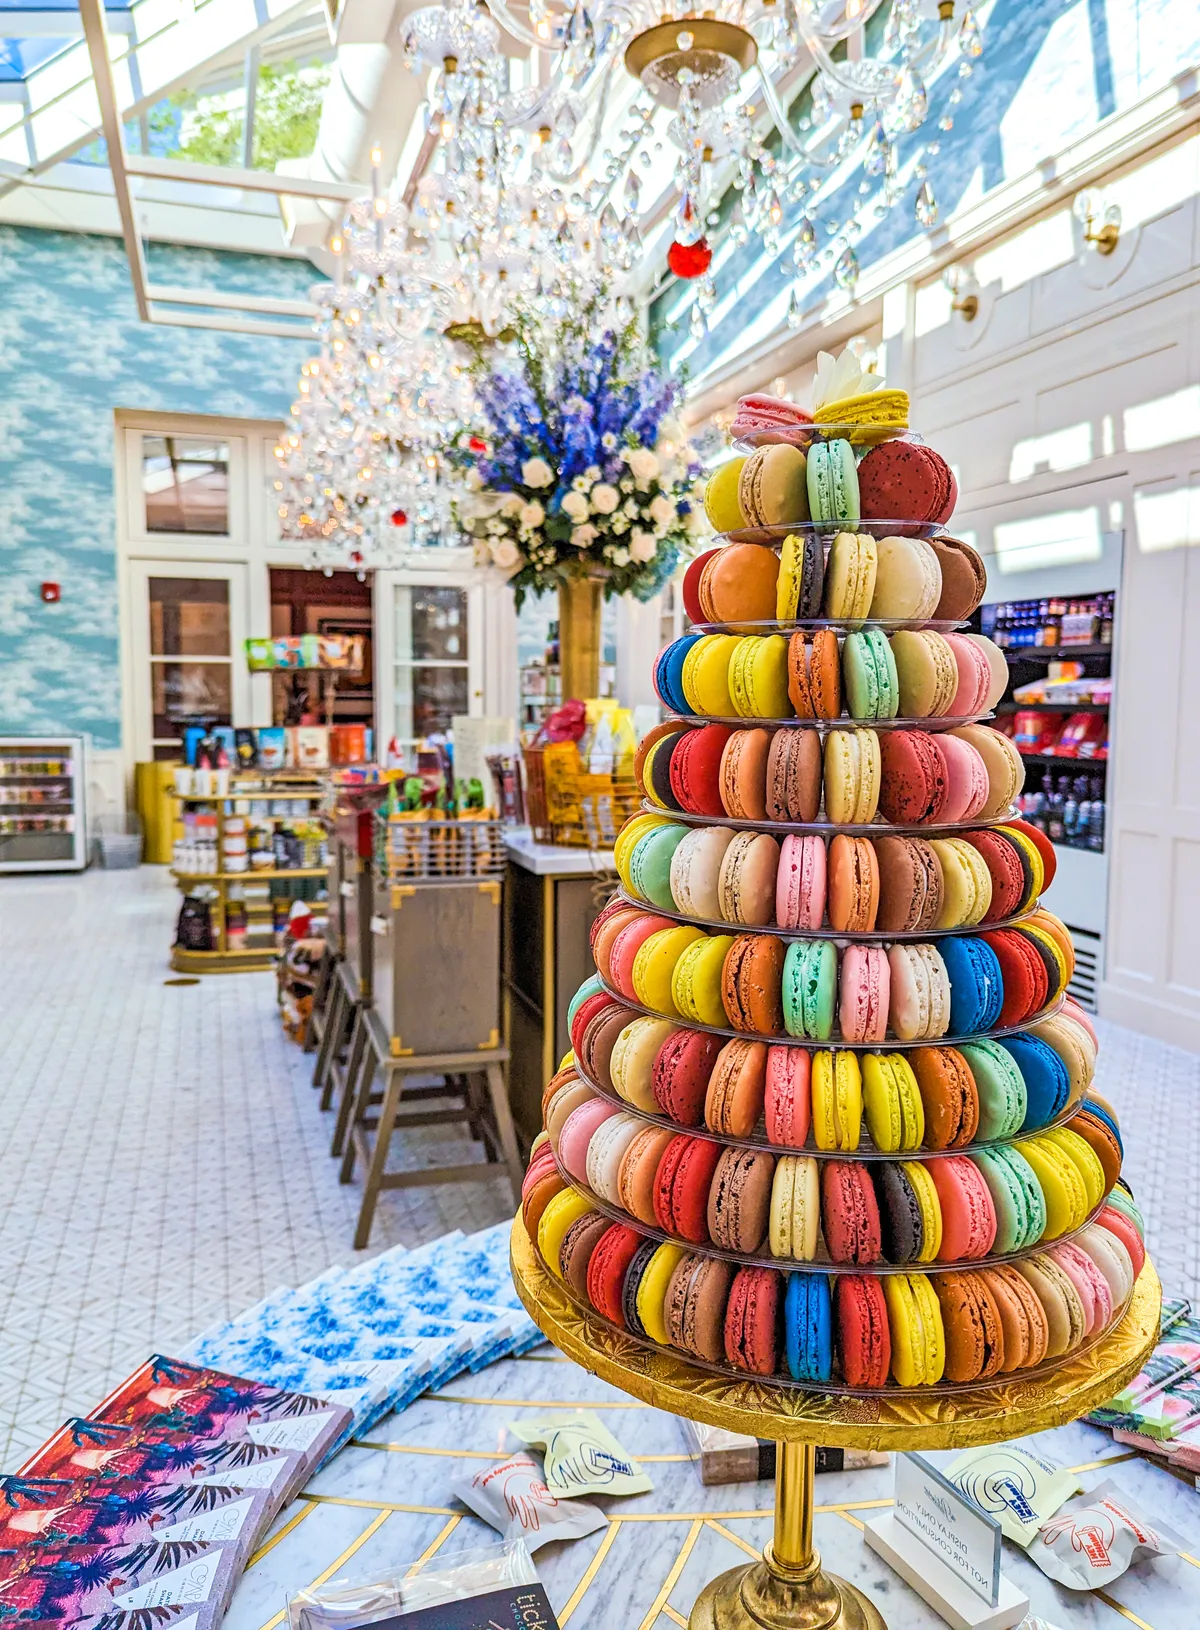 A display of French macarons at The Patisserie